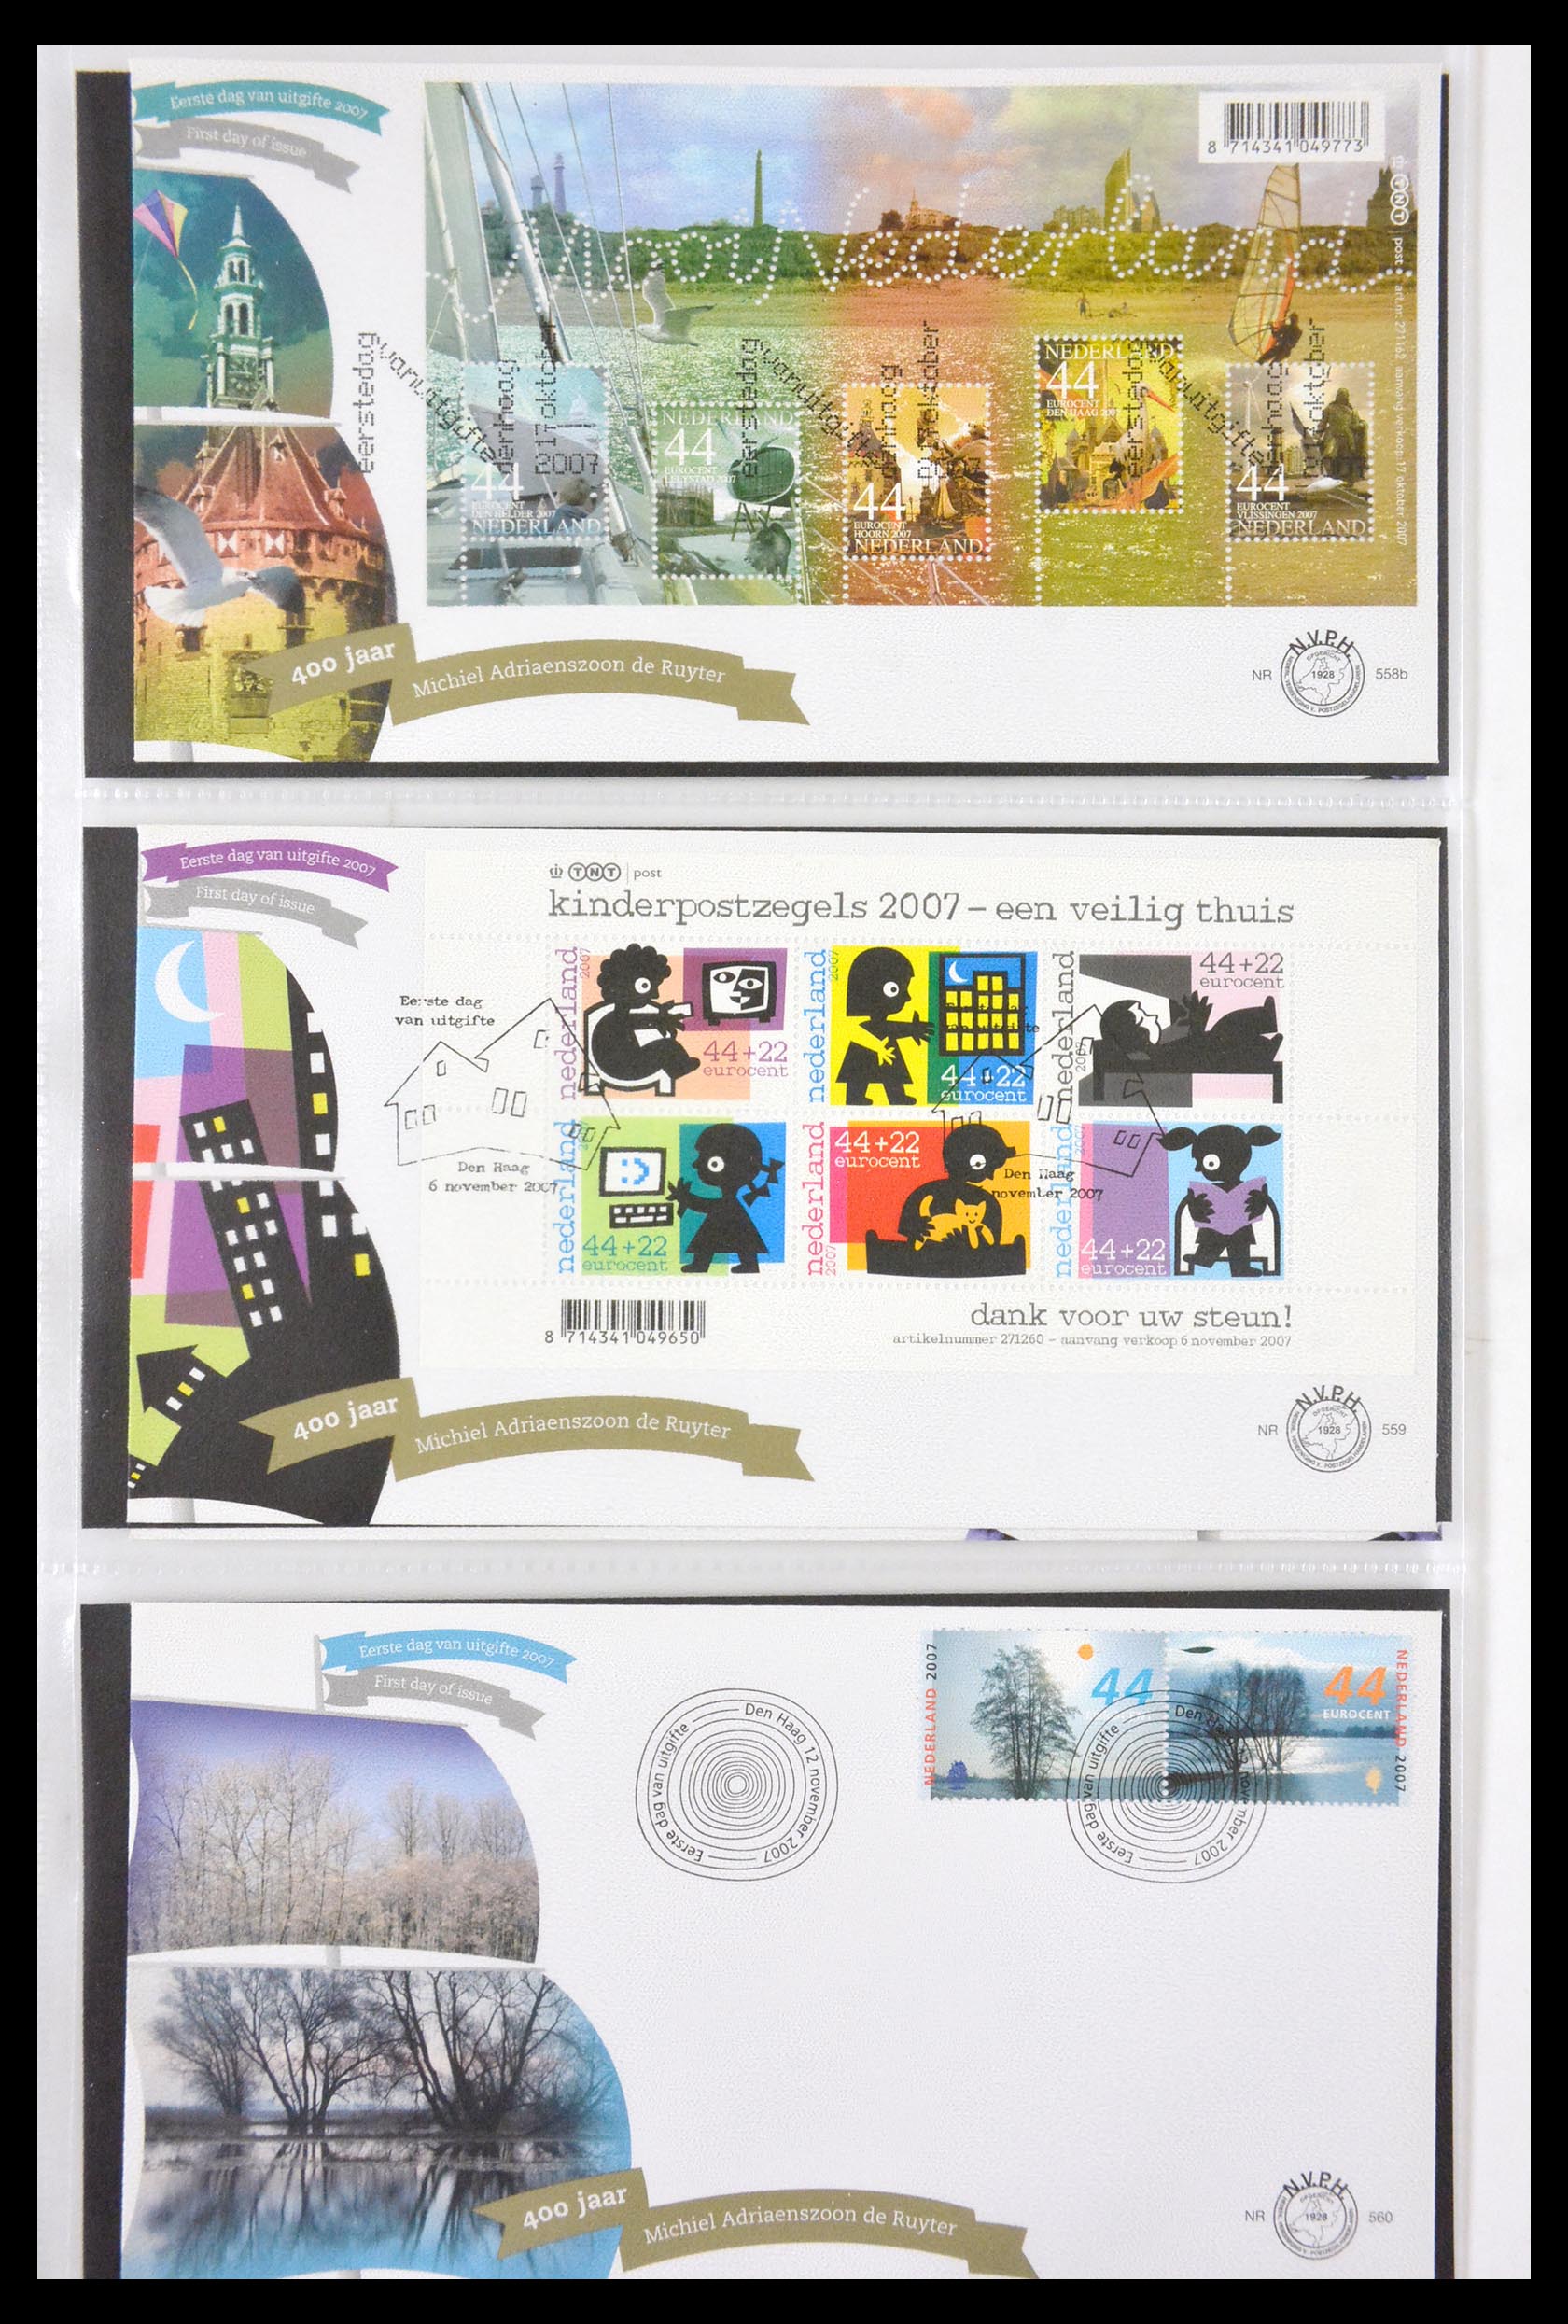 29850 051 - 29850 Netherlands FDC's 2001-2012.